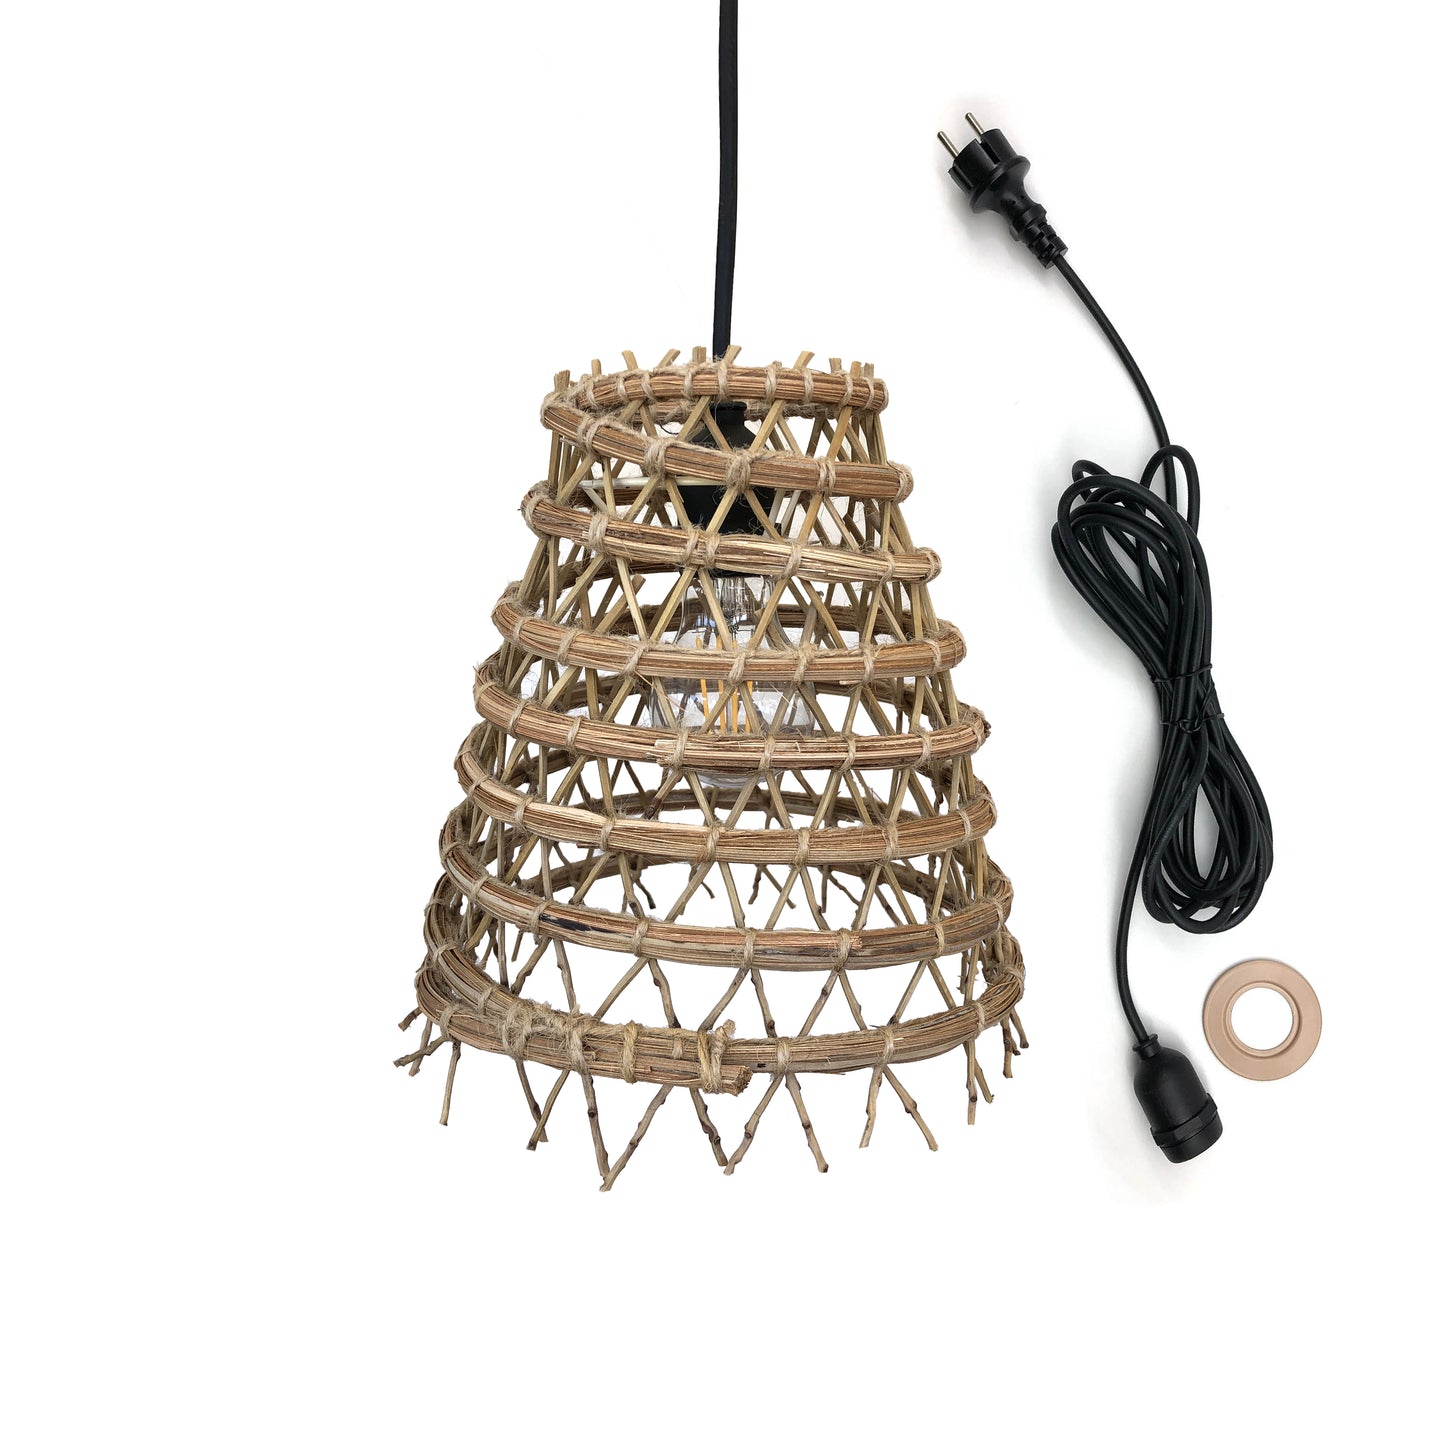 ZAKARI OUTDOOR CABLE mains-powered pendant lamp in bohemian natural date palm fiber 5m cable length